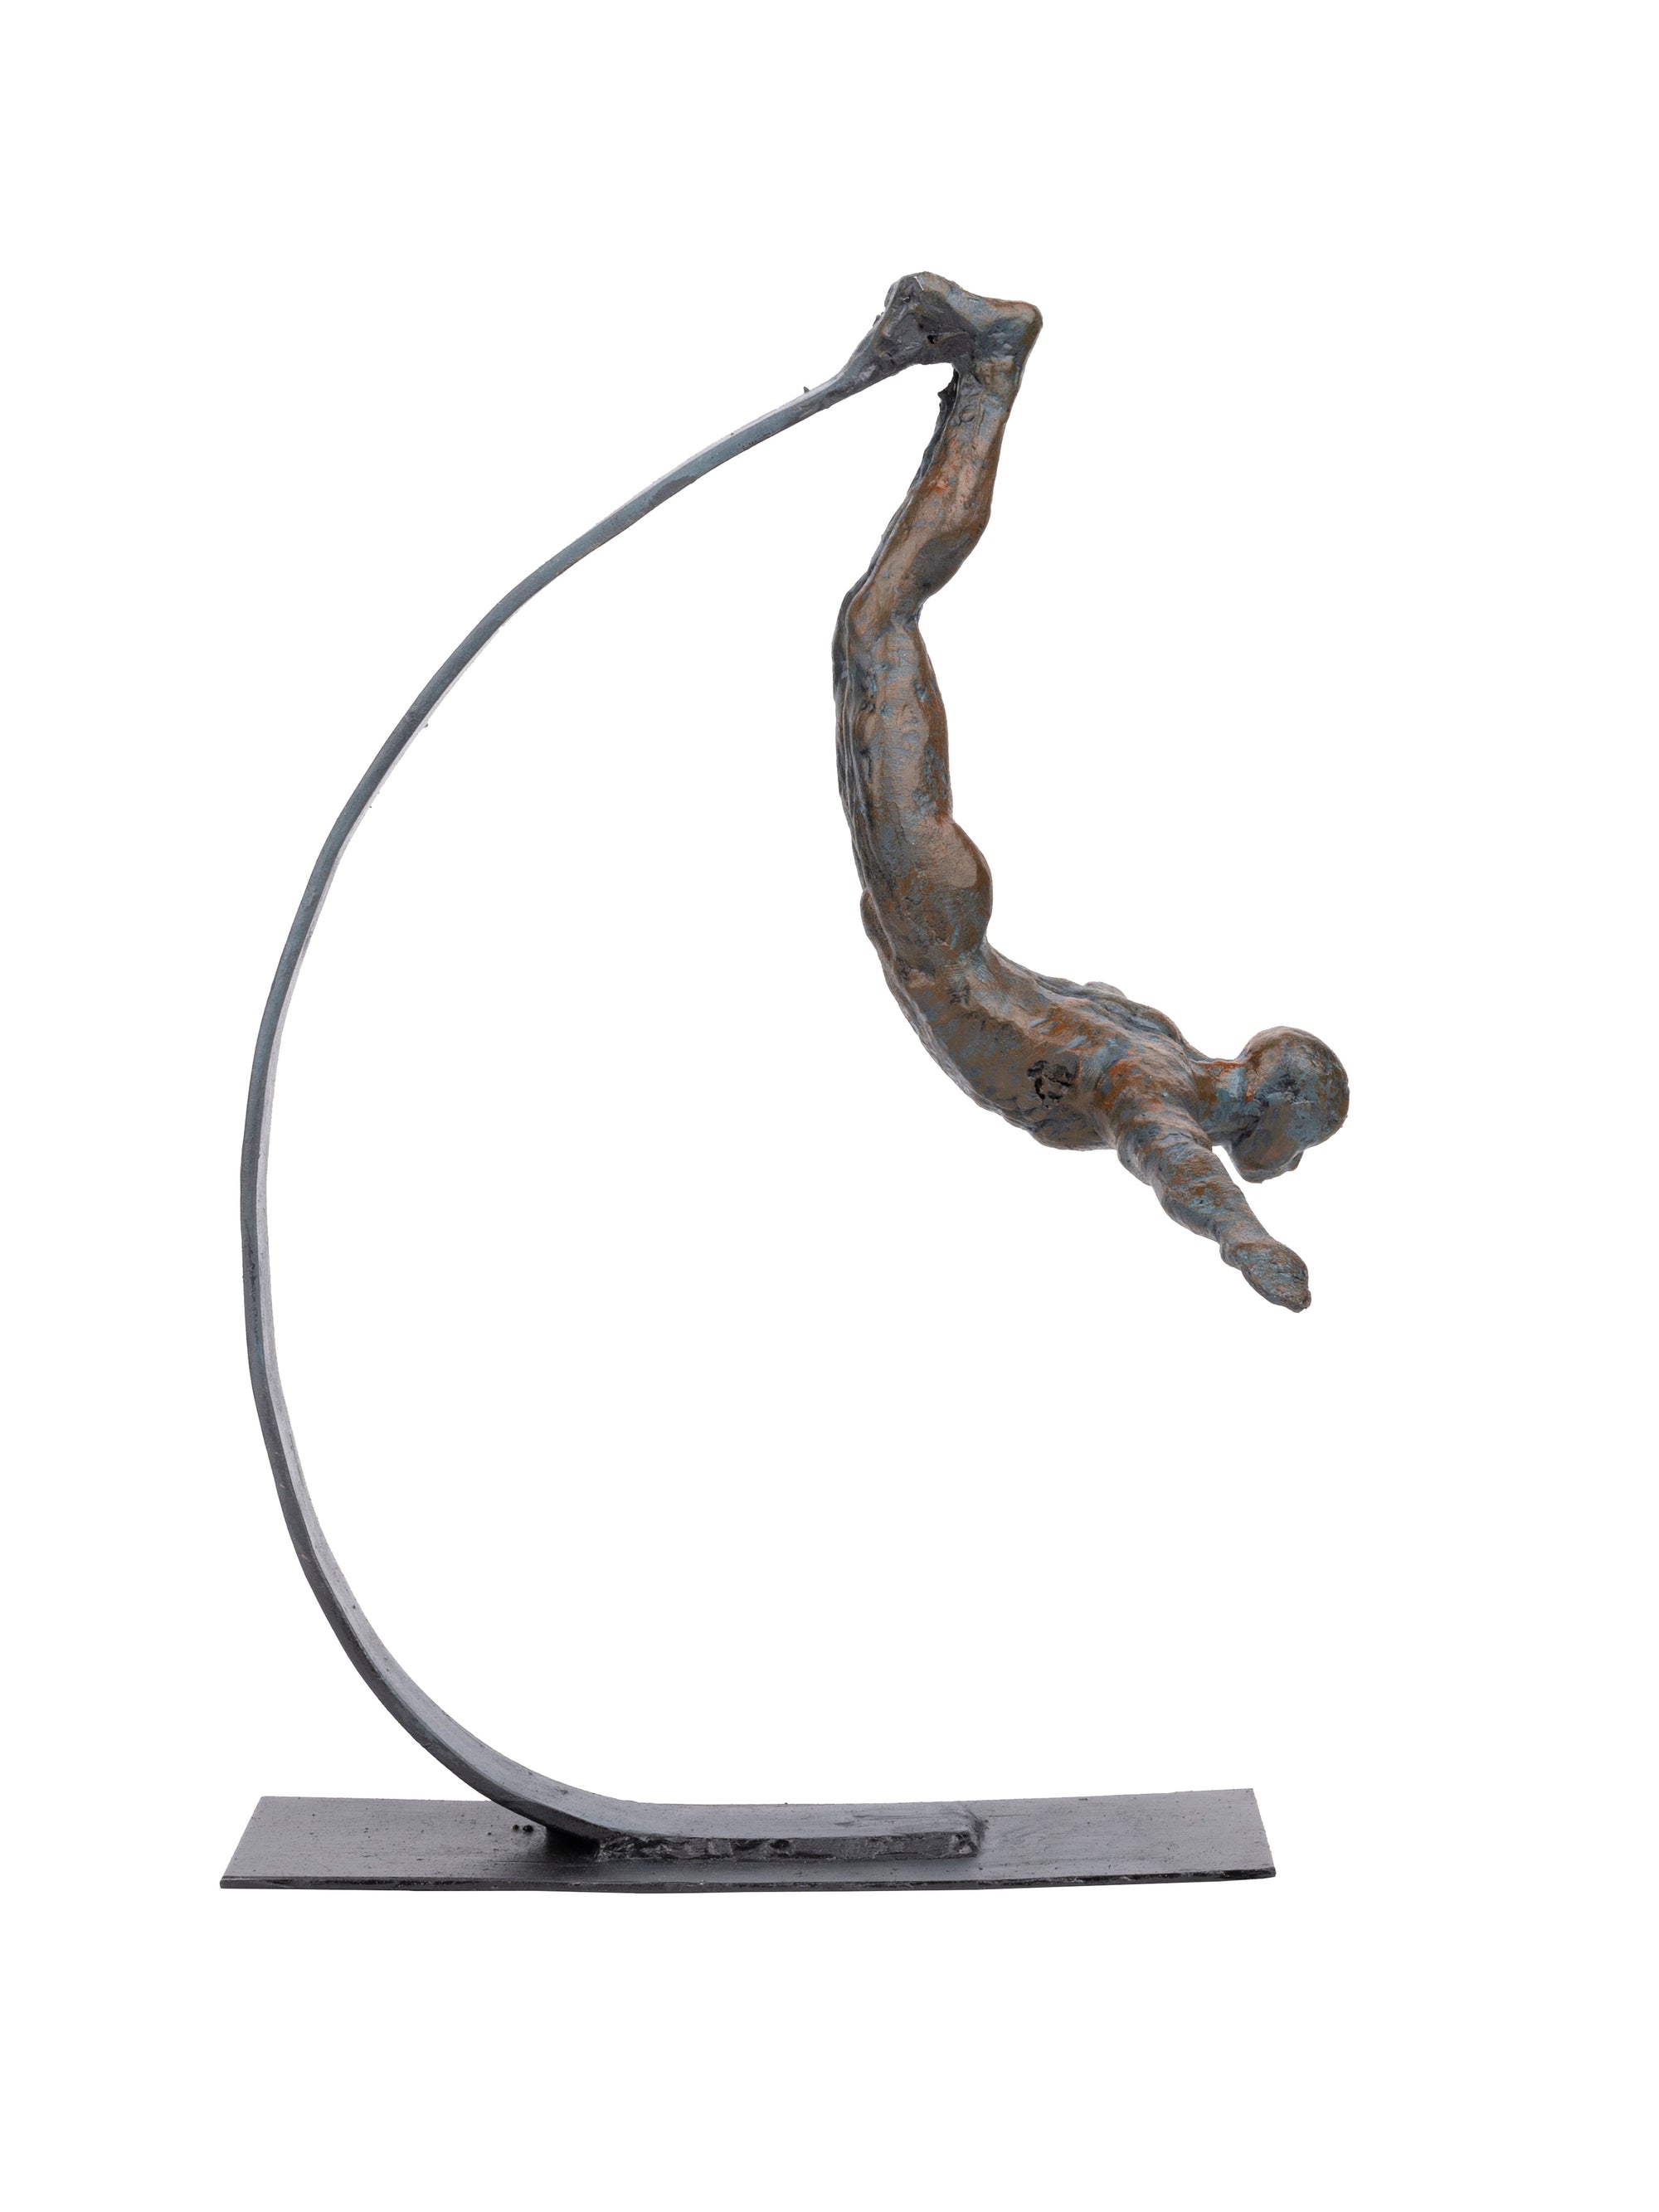 Sculpture name - ESSENCE OF FREEDOM - The Heritage Artifacts